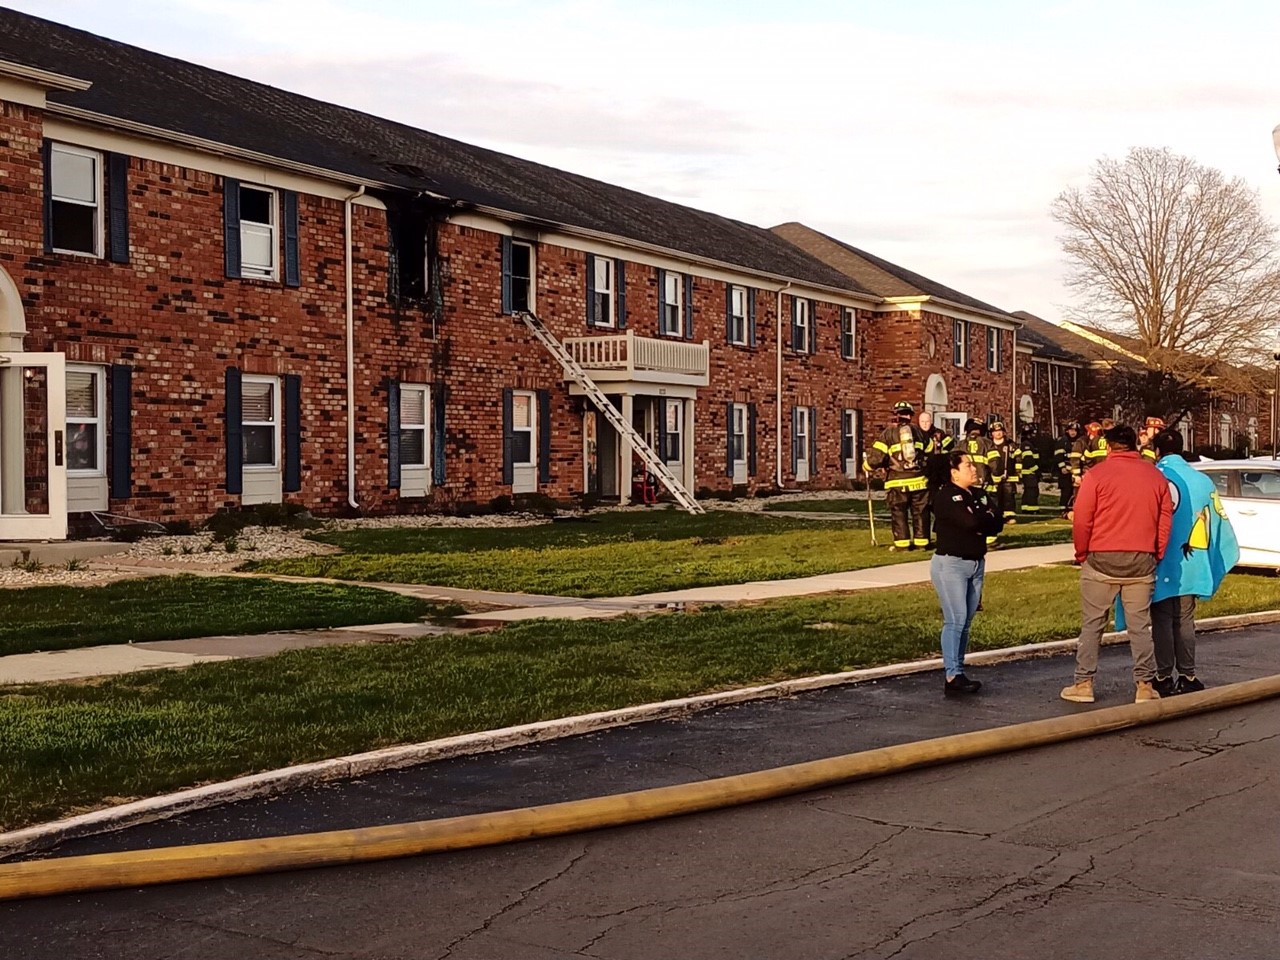 IFD respond to fire at Lake Castleton Apartments